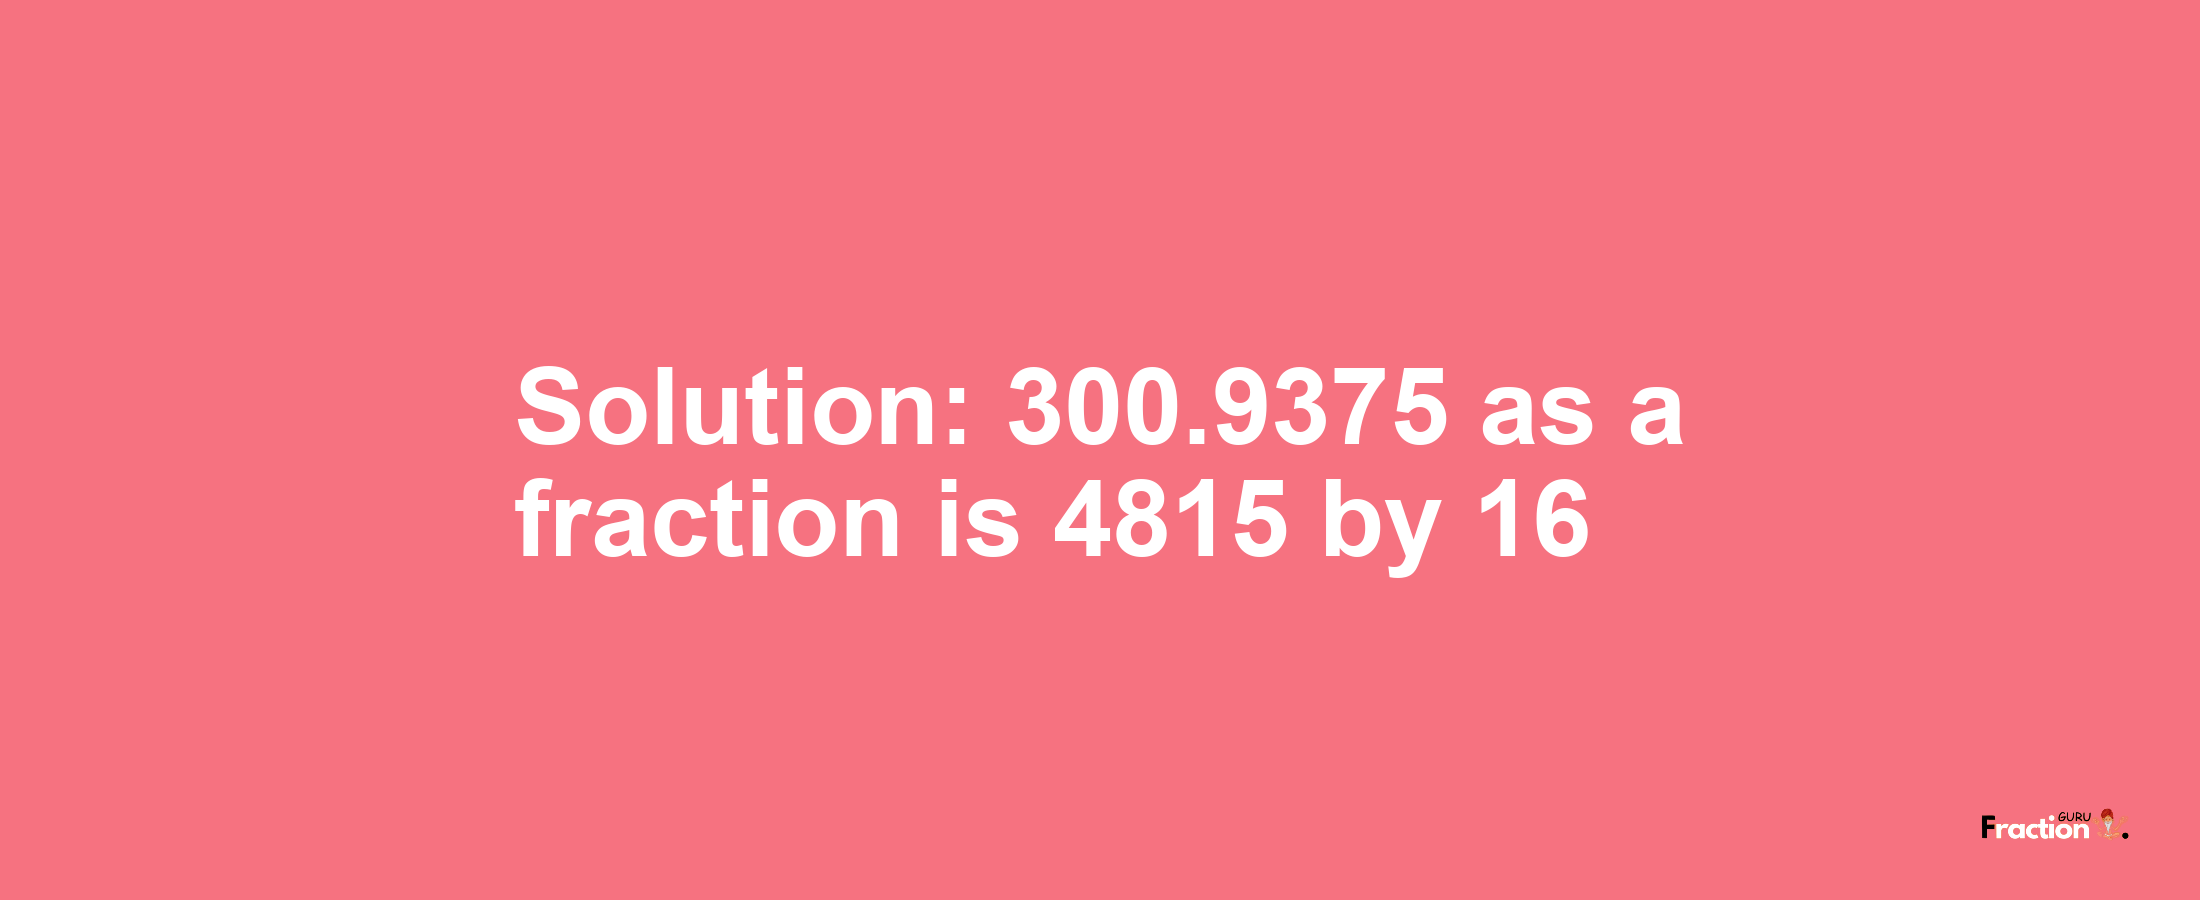 Solution:300.9375 as a fraction is 4815/16